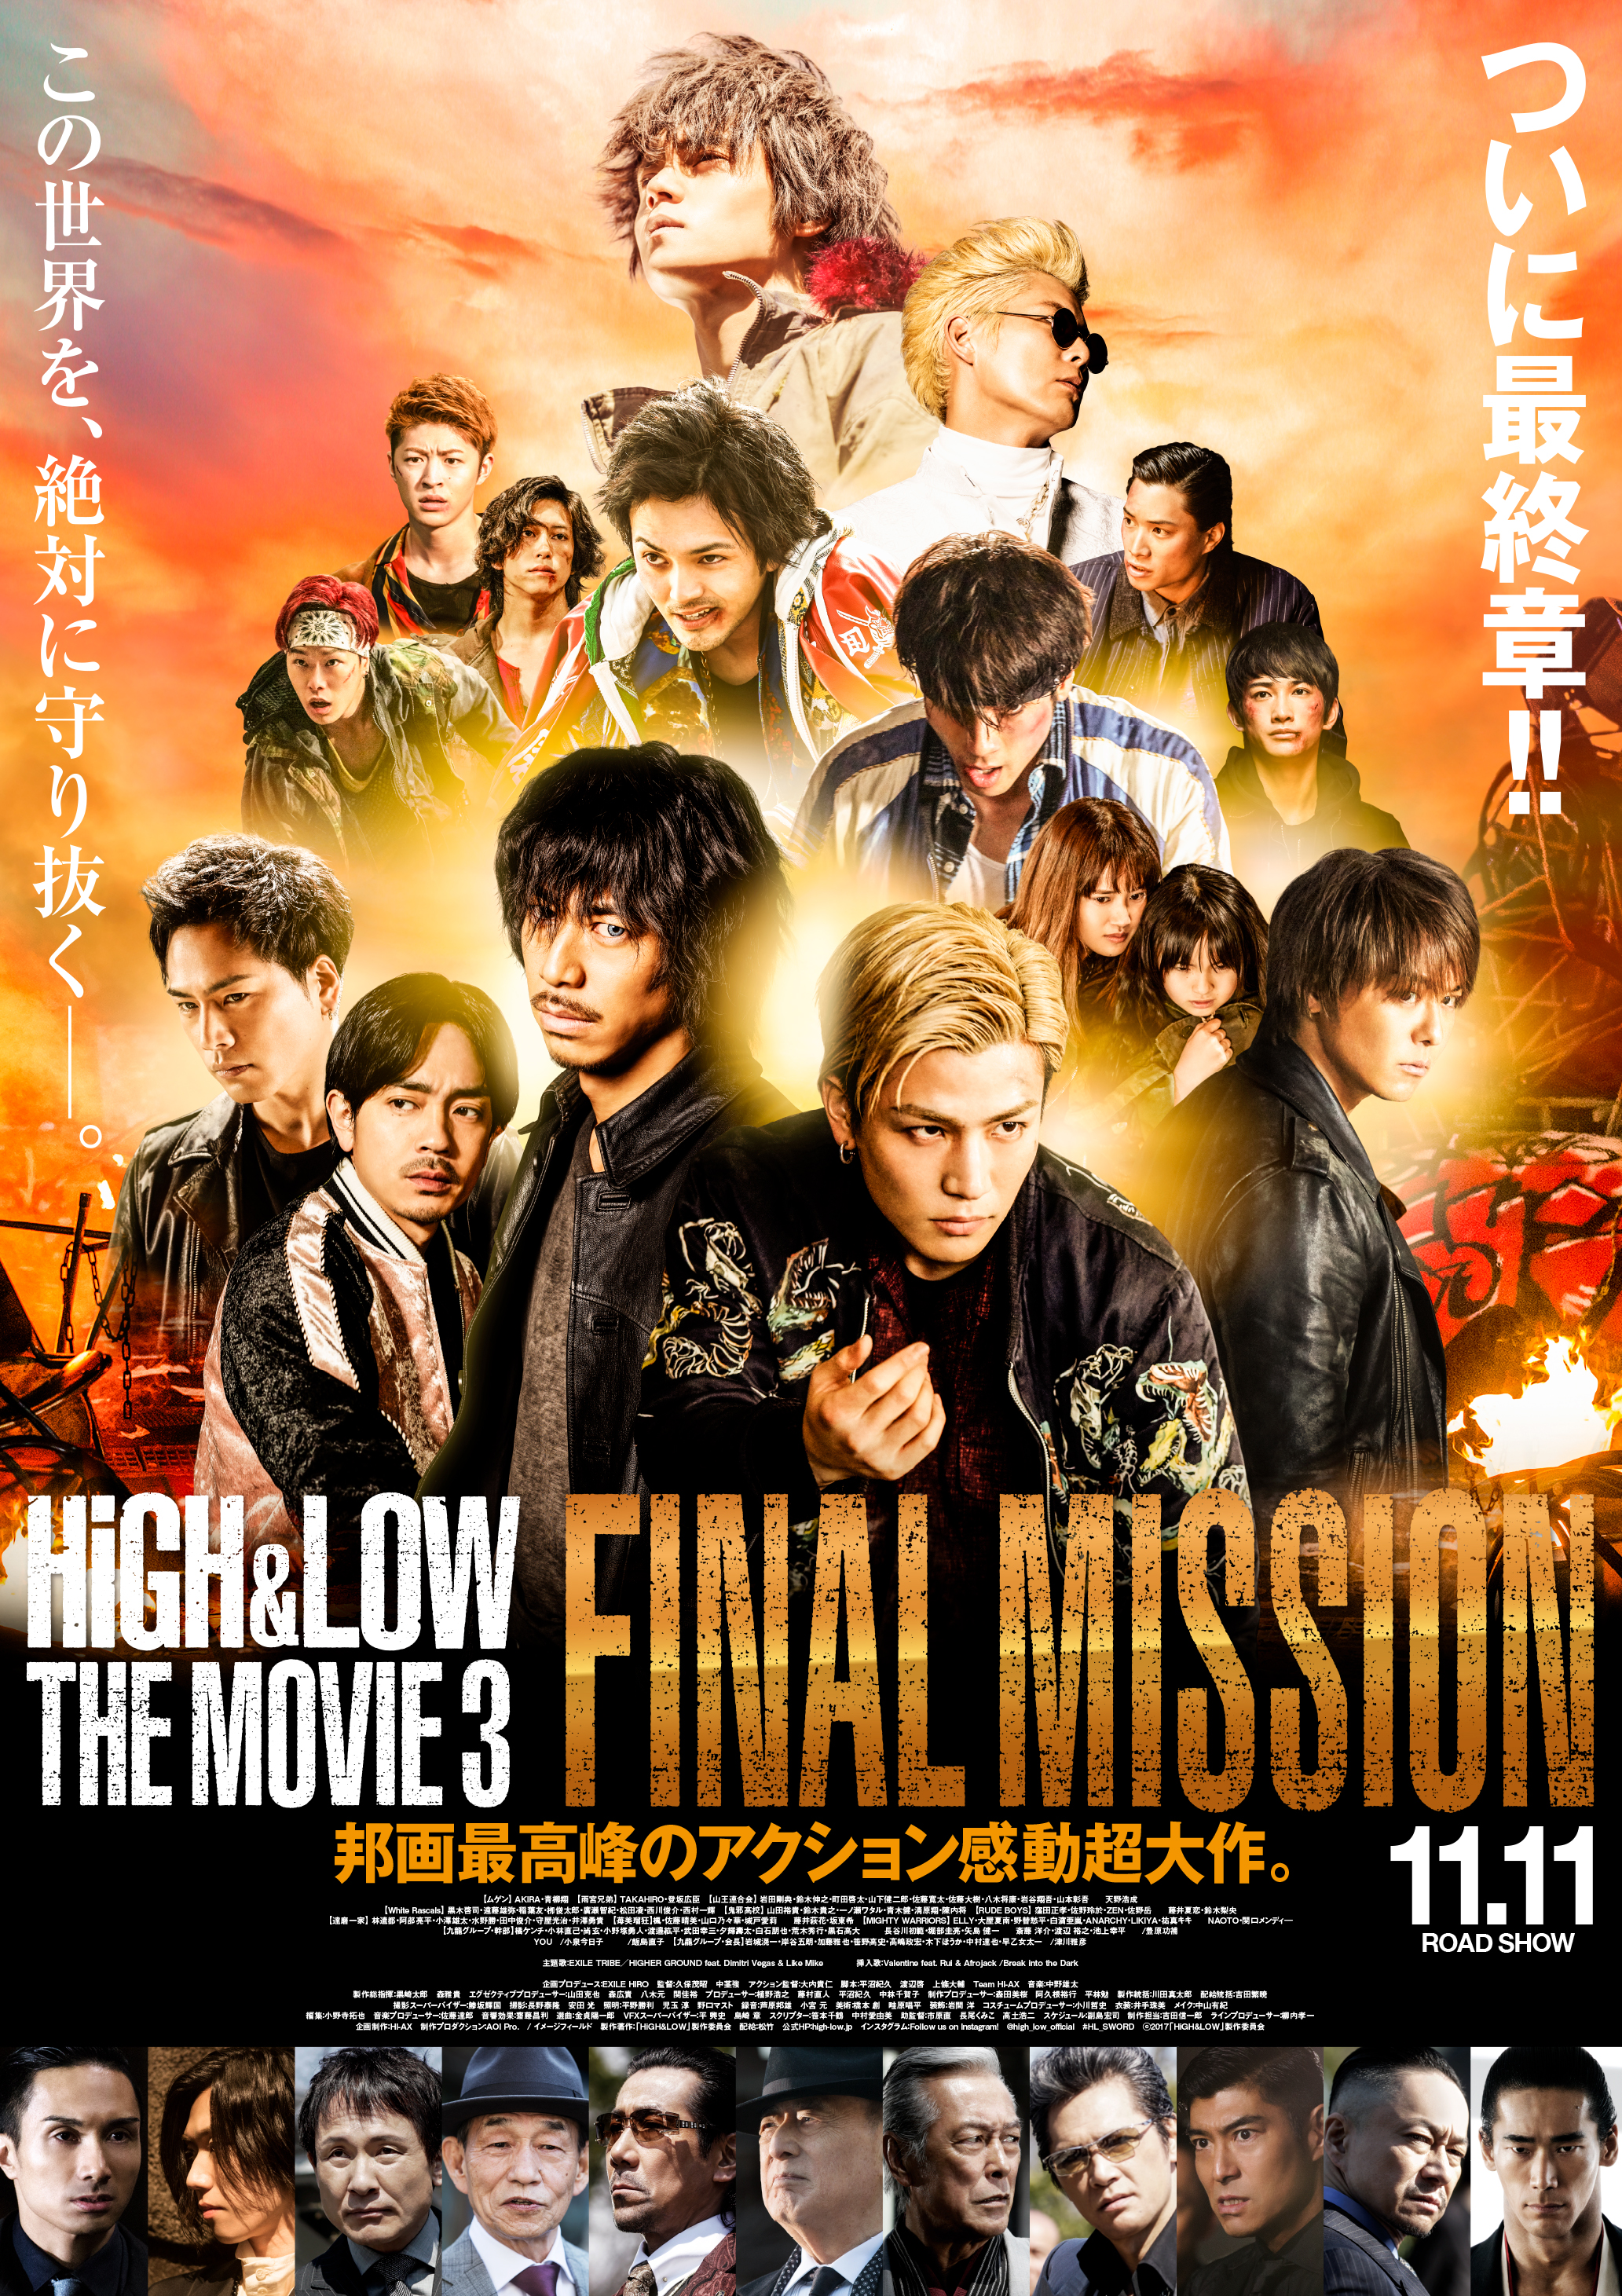 HiGH&LOW THE MOVIE 3 ／ FINAL MISSIONポスタービジュアル